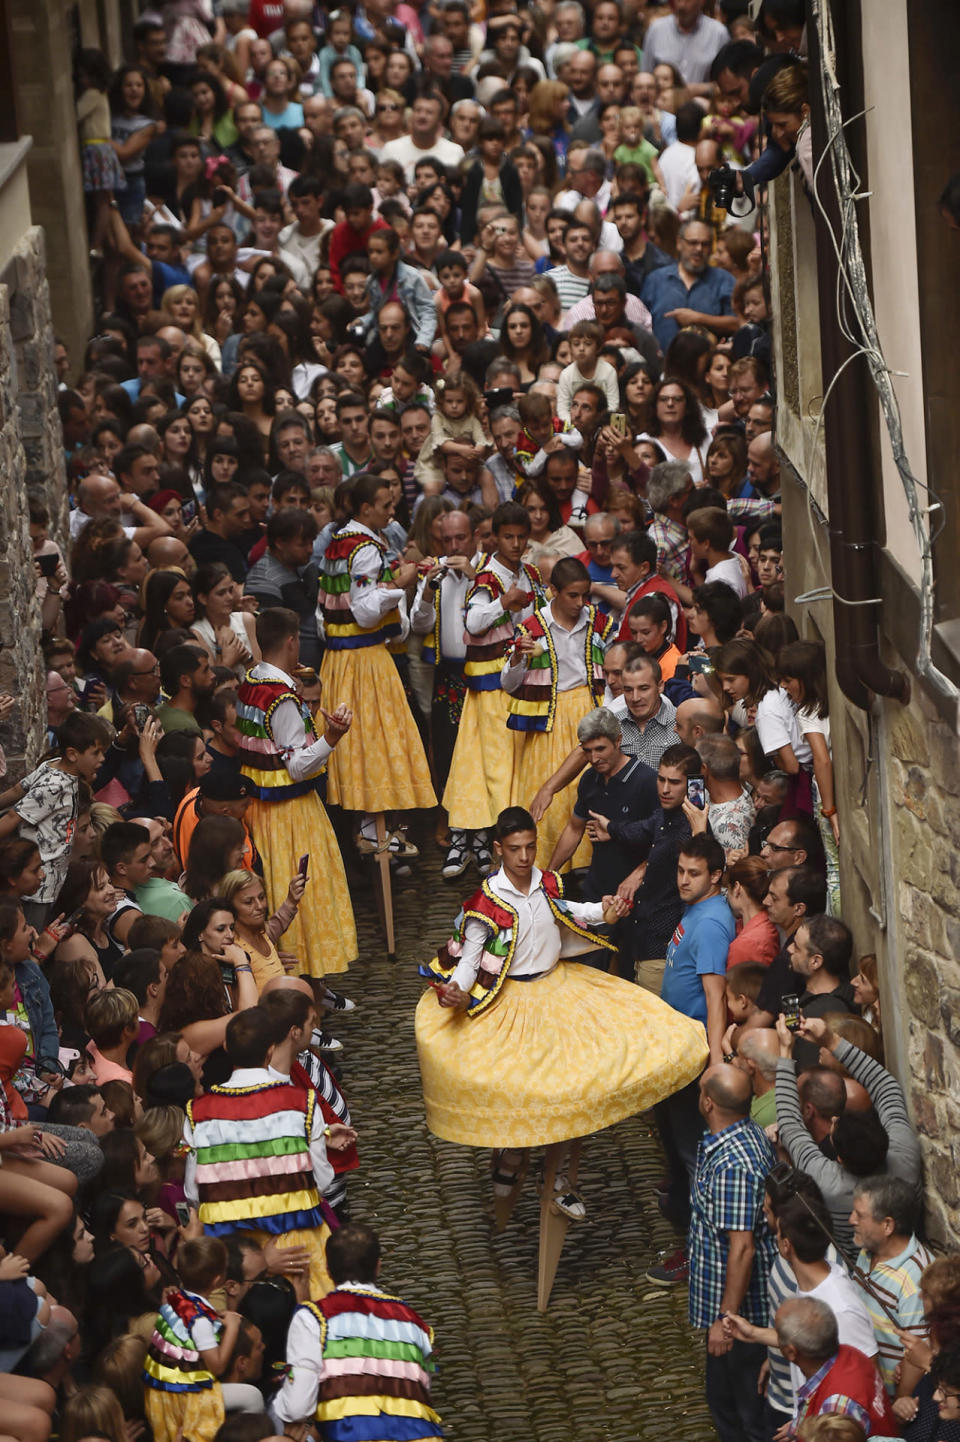 <p>People surround dancers as they perform on stilts in honor of Saint Mary Magdalene in a street for the traditional “Danza de Los Zancos” (Los Zancos Dance), in the small town of Anguiano, northern Spain, Saturday, July 23, 2016. As an ancient tradition for more than 4th centuries, eight young people from the town balance on stilts down the old street, turning to the sound of folk music played on a pipe and drum. (AP Photo/Alvaro Barrientos)</p>